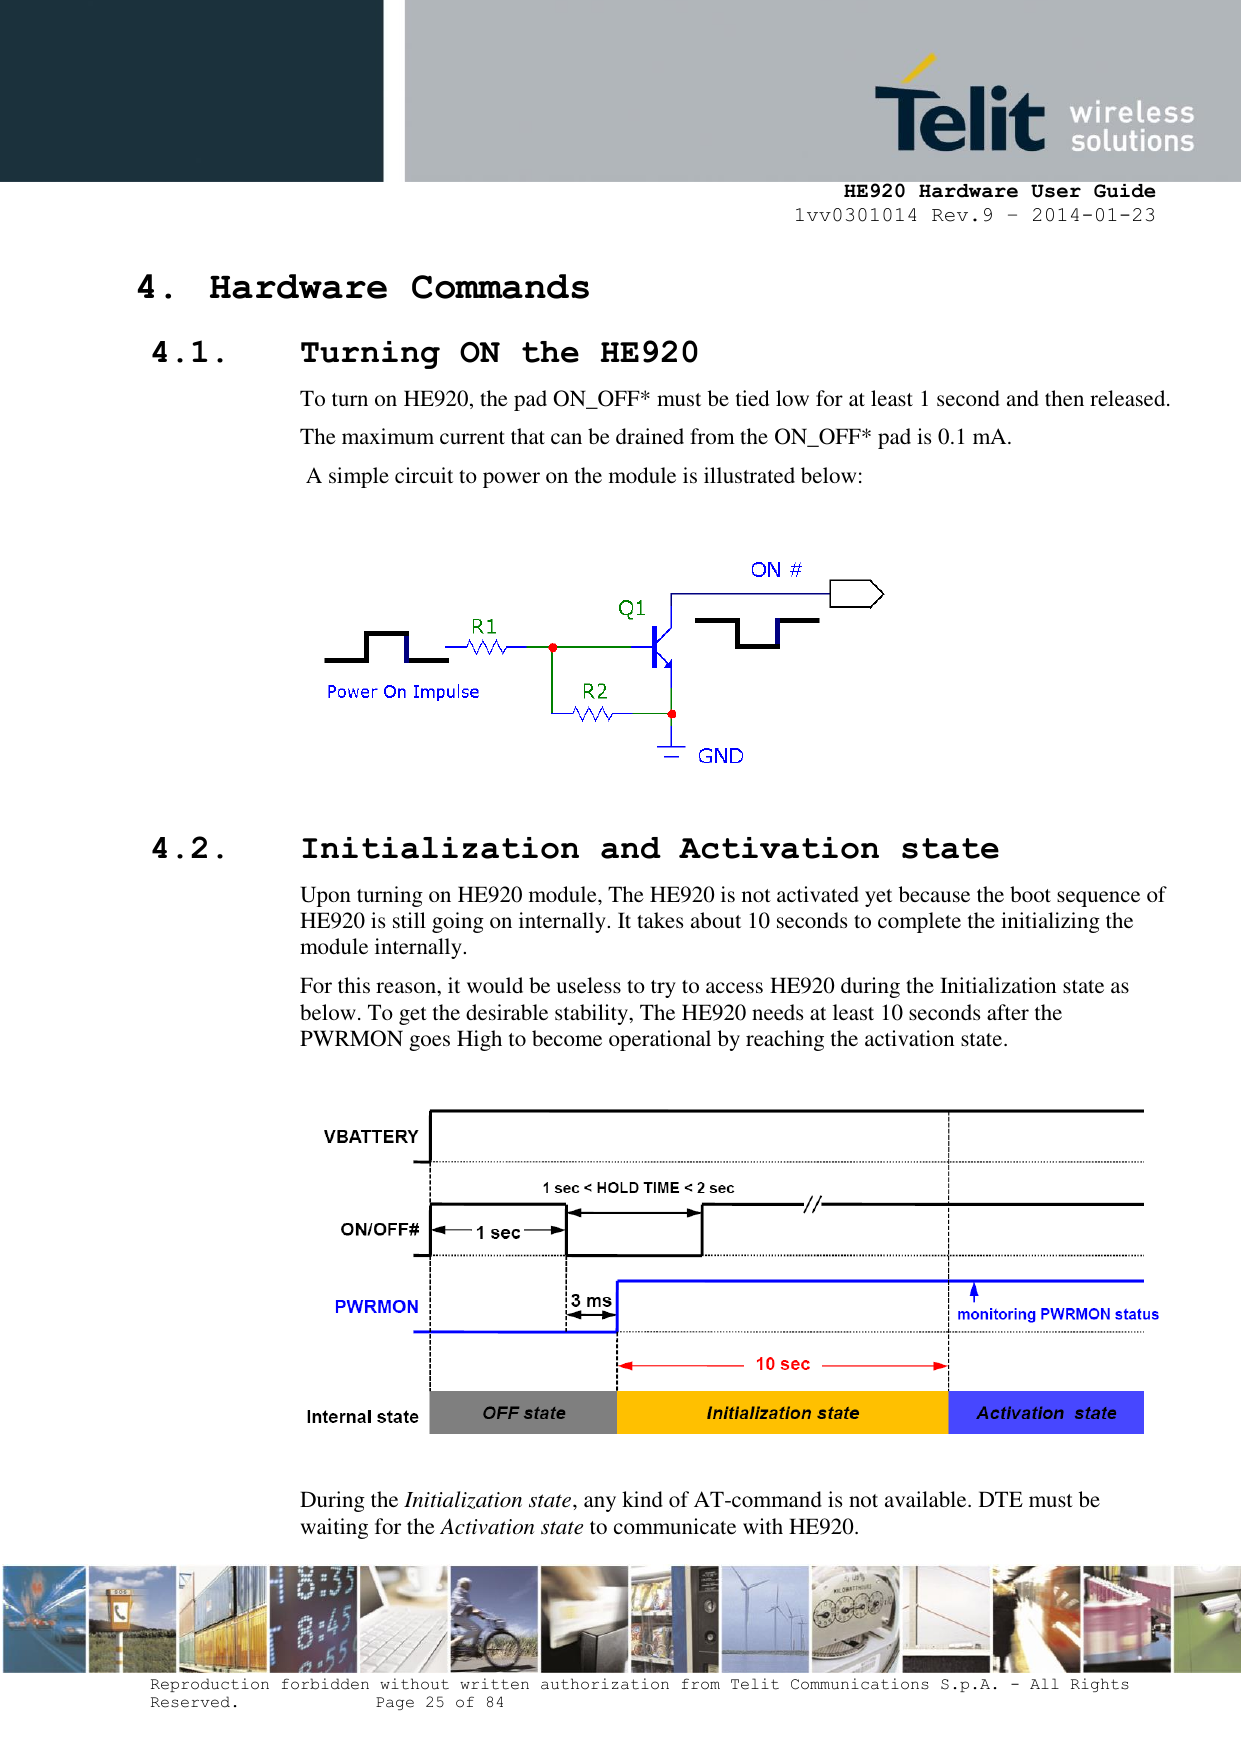     HE920 Hardware User Guide 1vv0301014 Rev.9 – 2014-01-23 Reproduction forbidden without written authorization from Telit Communications S.p.A. - All Rights Reserved.    Page 25 of 84  4. Hardware Commands 4.1. Turning ON the HE920 To turn on HE920, the pad ON_OFF* must be tied low for at least 1 second and then released. The maximum current that can be drained from the ON_OFF* pad is 0.1 mA.  A simple circuit to power on the module is illustrated below:   4.2. Initialization and Activation state Upon turning on HE920 module, The HE920 is not activated yet because the boot sequence of HE920 is still going on internally. It takes about 10 seconds to complete the initializing the module internally. For this reason, it would be useless to try to access HE920 during the Initialization state as below. To get the desirable stability, The HE920 needs at least 10 seconds after the PWRMON goes High to become operational by reaching the activation state.    During the Initialization state, any kind of AT-command is not available. DTE must be waiting for the Activation state to communicate with HE920. 